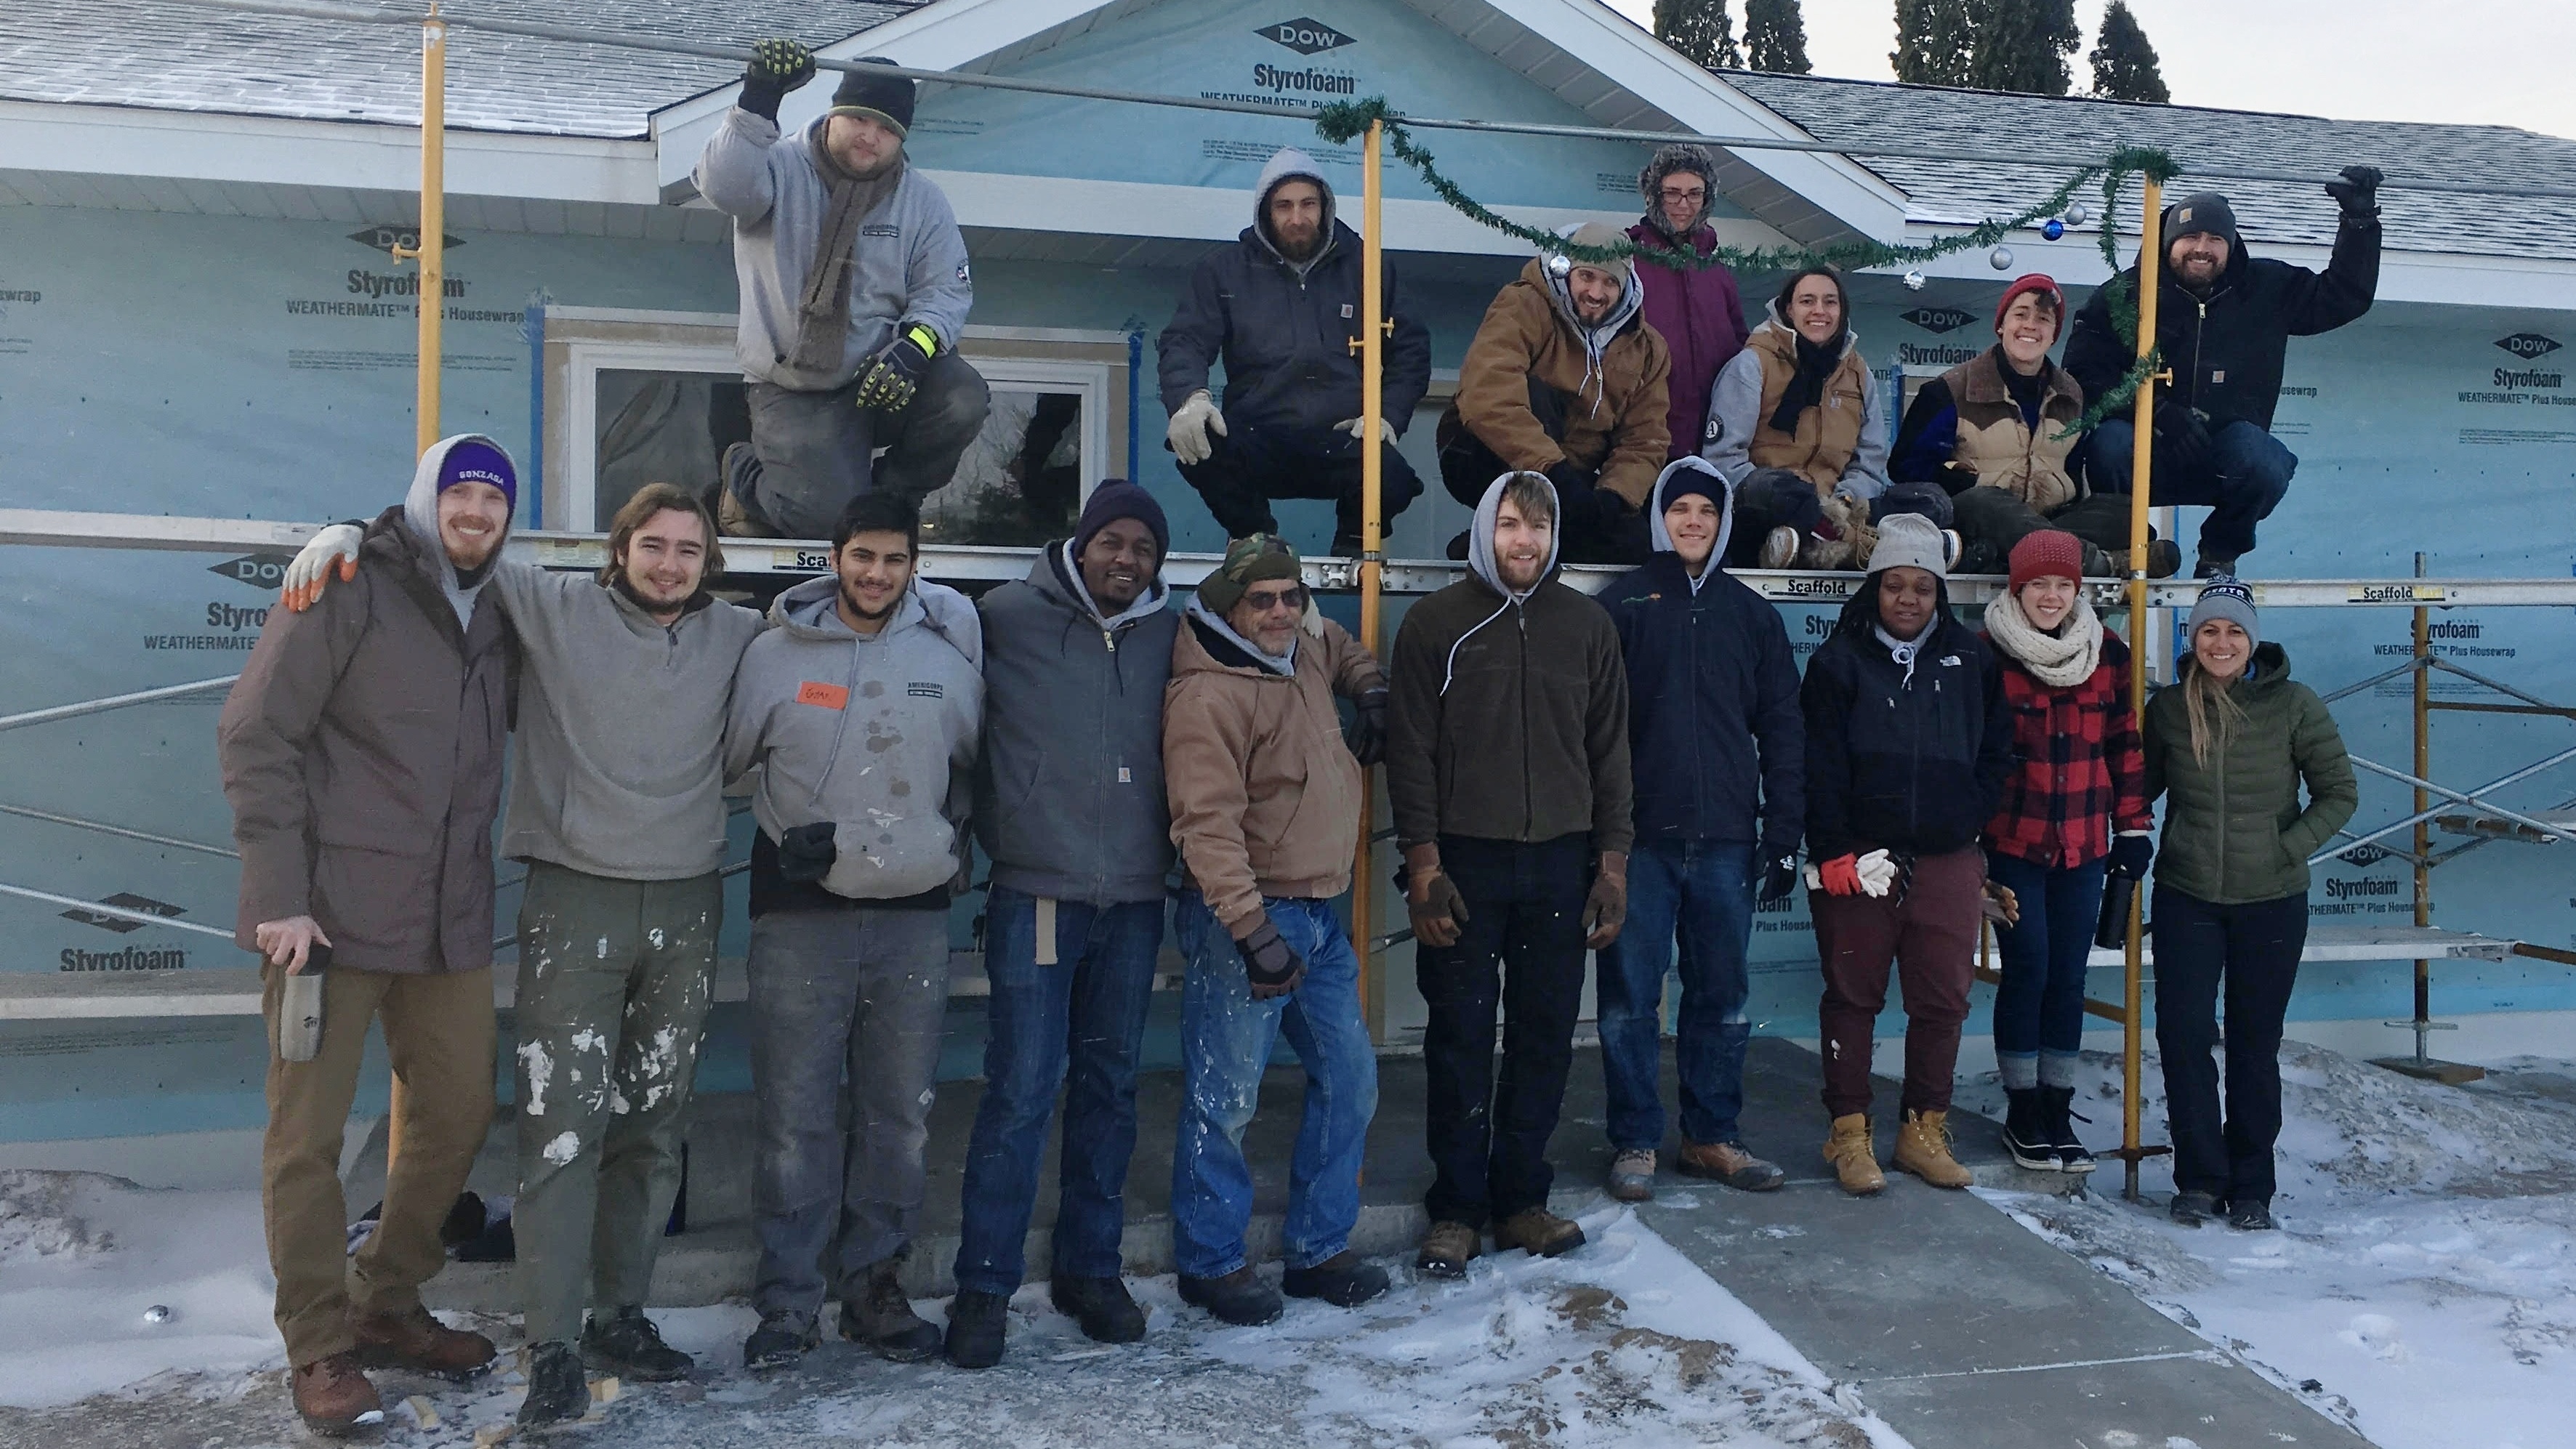 AmeriCorps members get things done, even in the cold